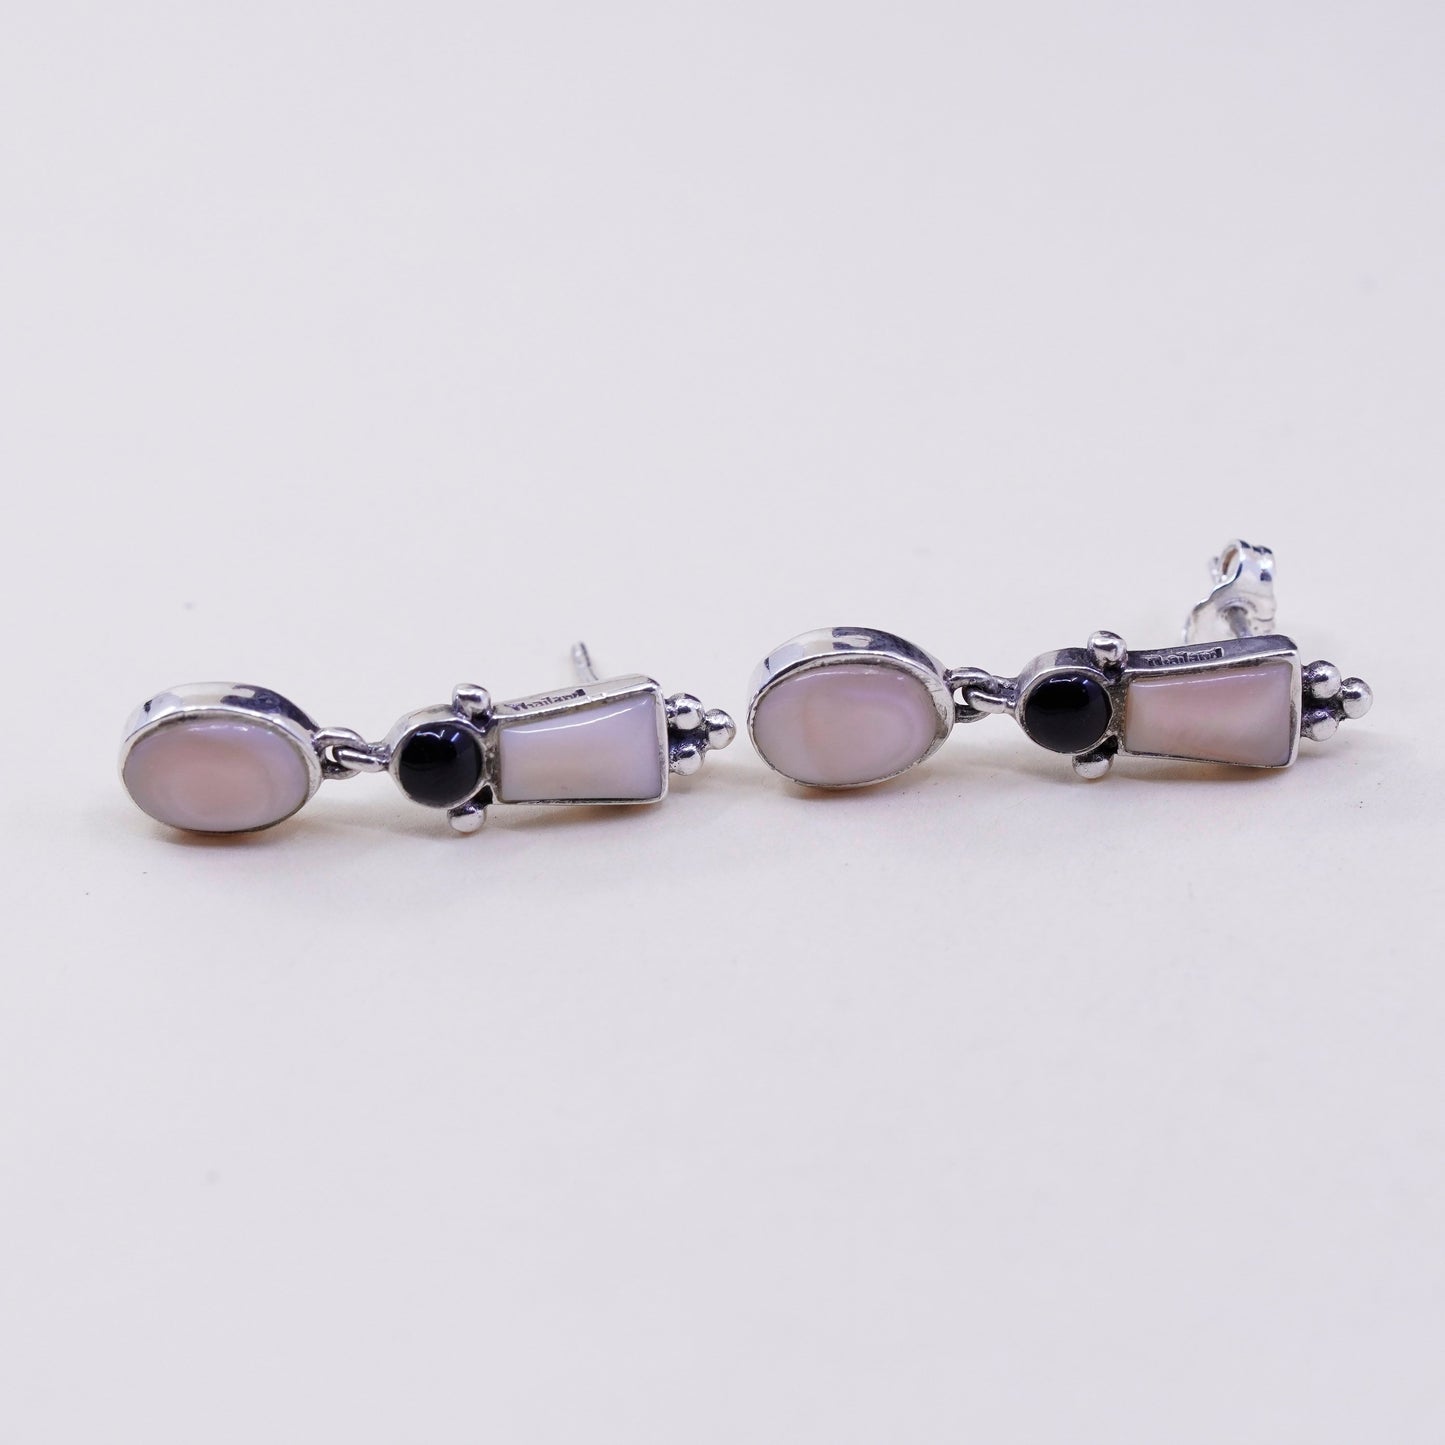 Vintage Sterling 925 silver handmade earrings with mother of pearl and obsidian